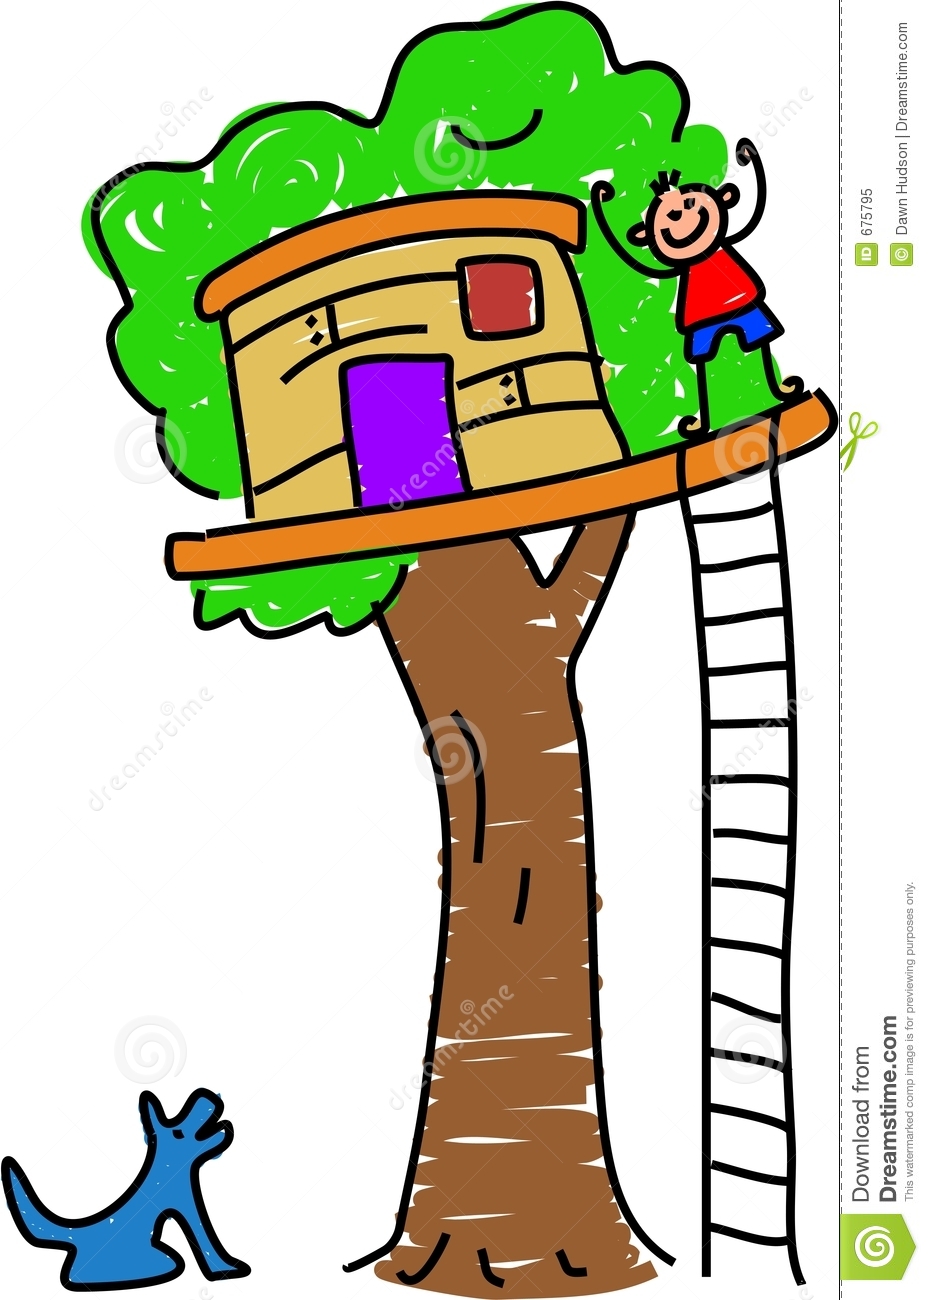 Little Boy Waving From His Tree House   Toddler Art Style